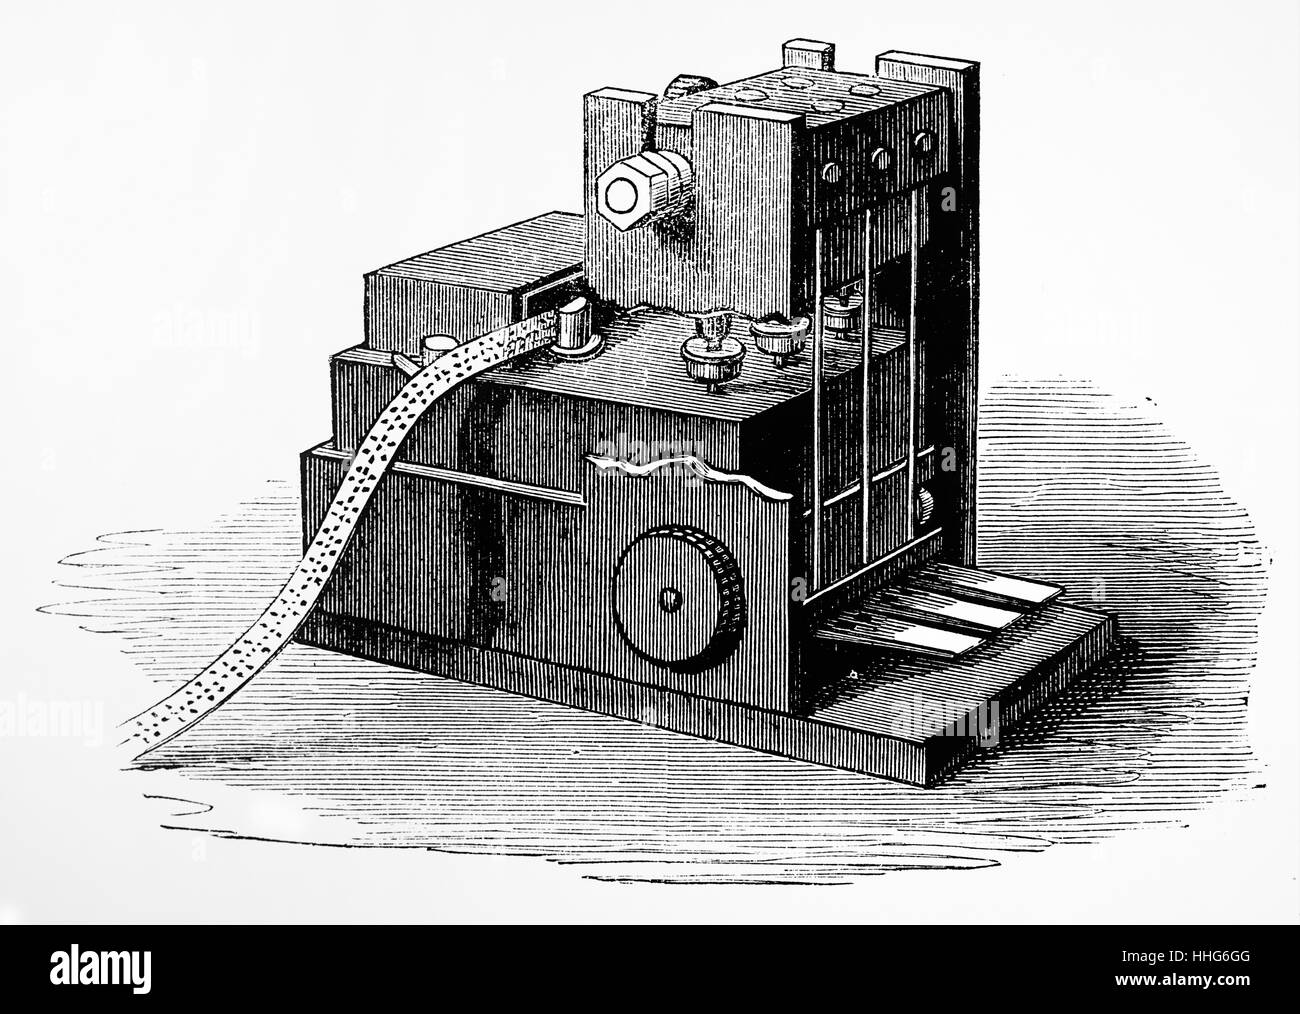 Pneumatically operated perforating machine for Morse electric telegraphs: used by the GPO. Stock Photo